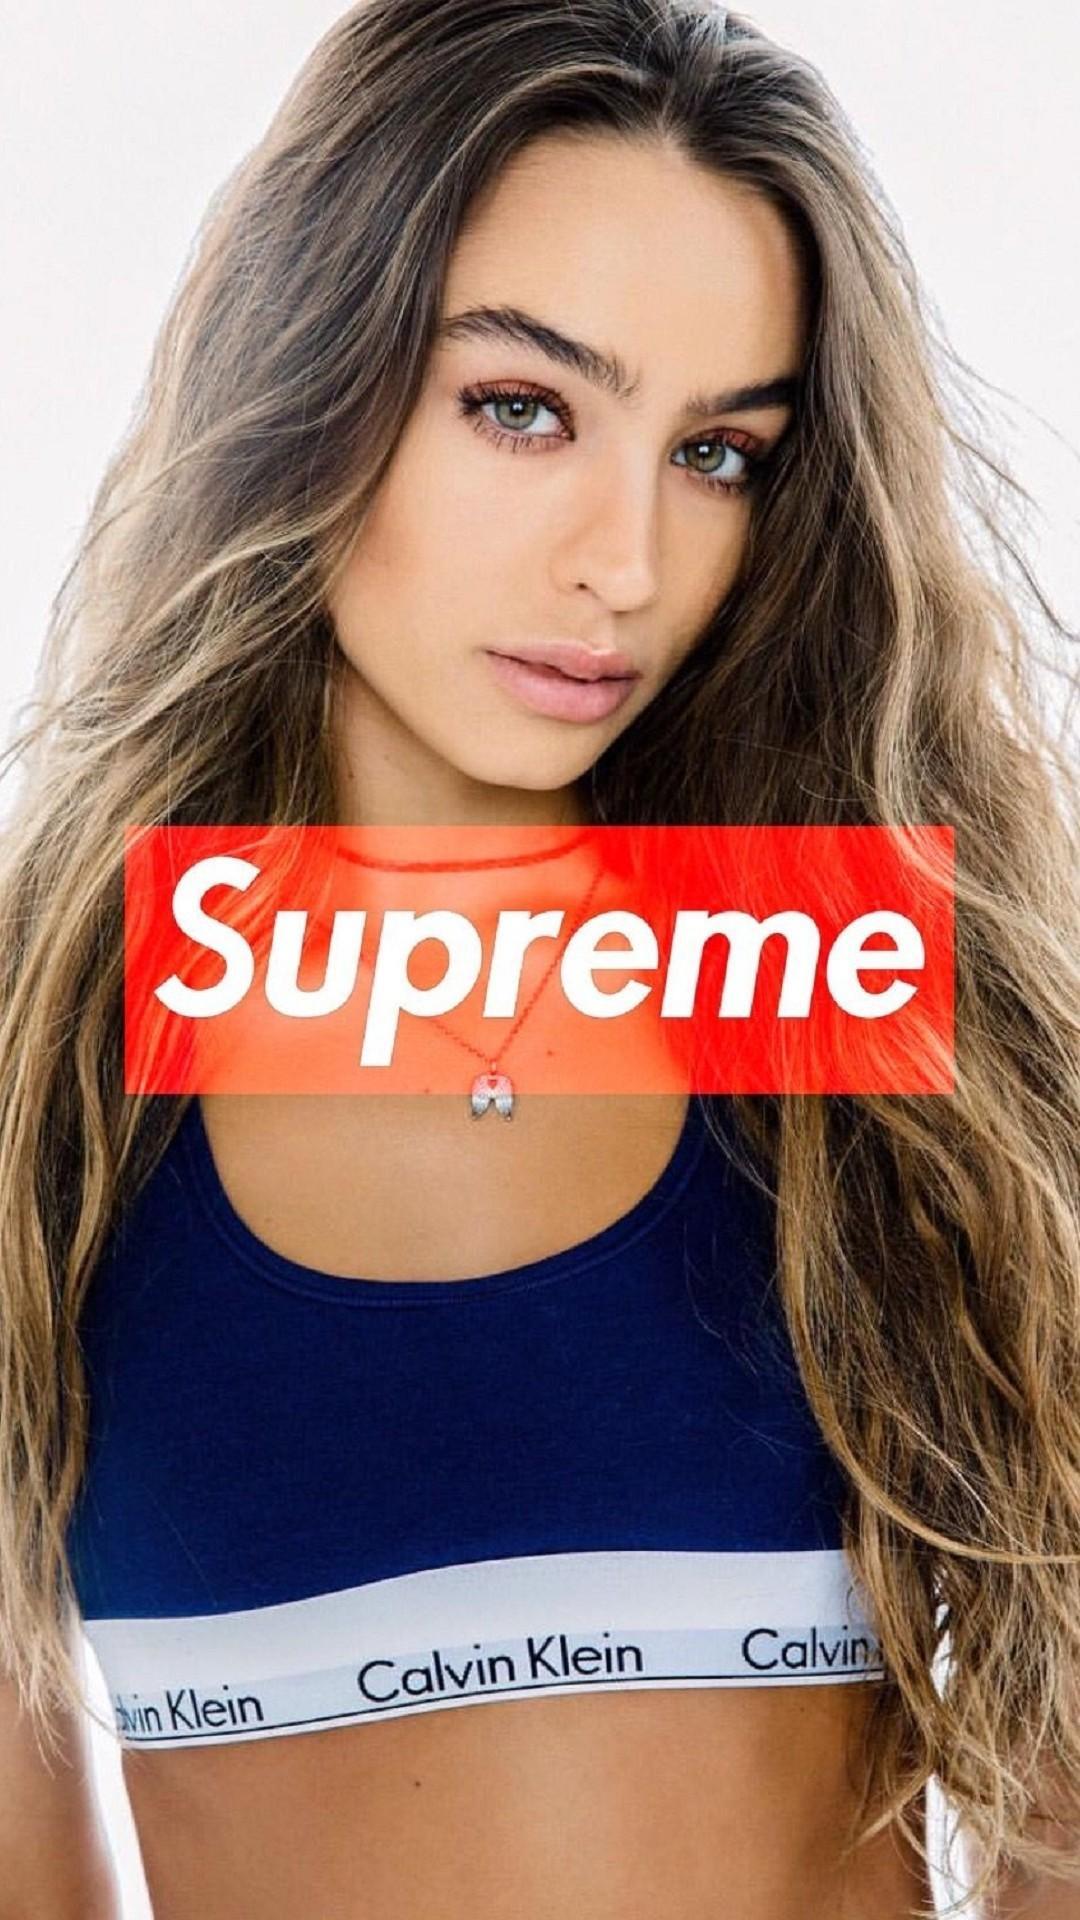 Supreme Girl Wallpapers Top Free Supreme Girl Backgrounds Wallpaperaccess